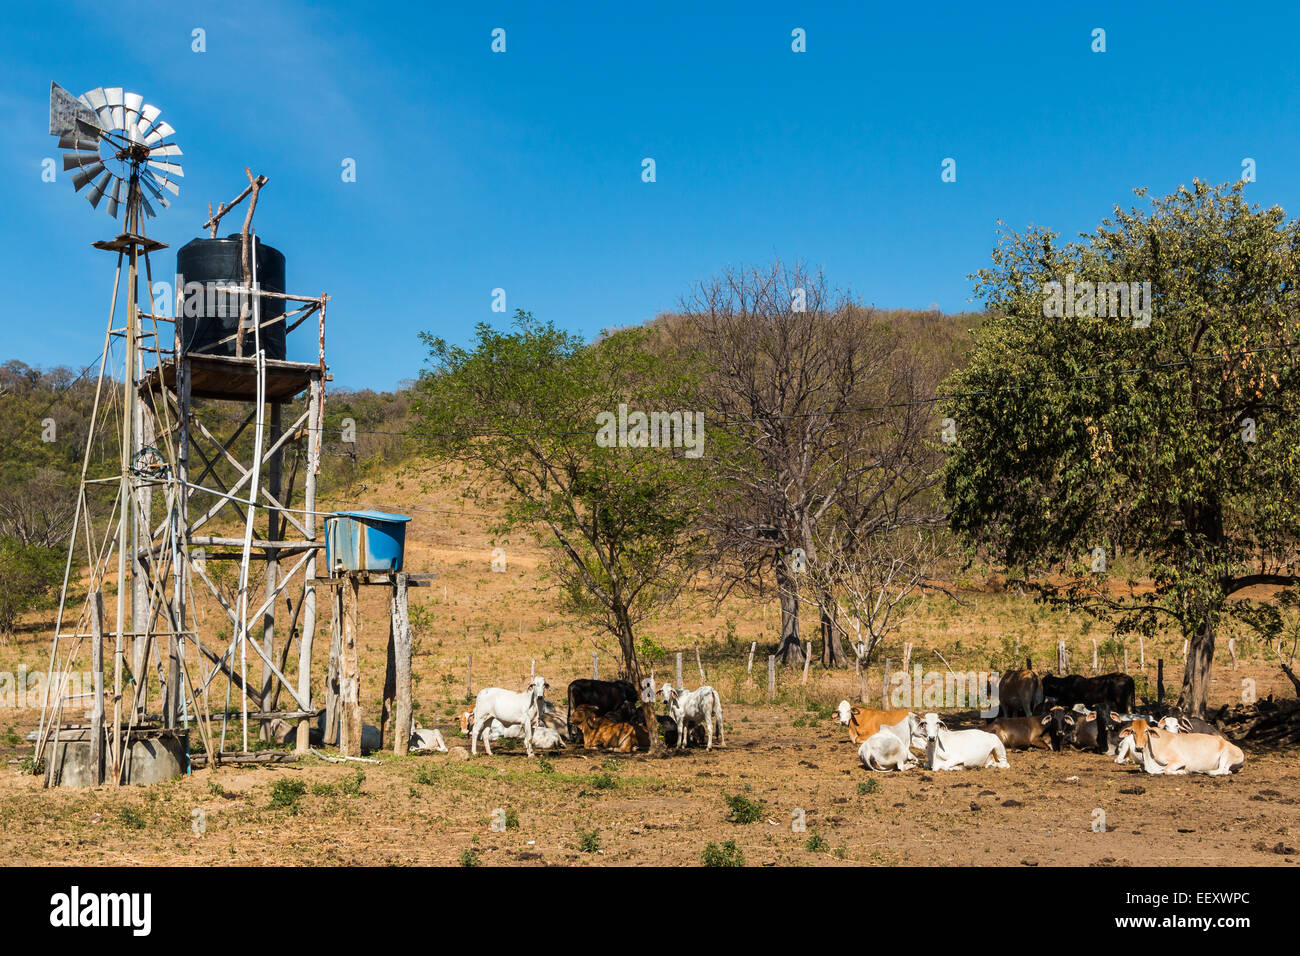 White Brahman cattle & others at farm with wind pump water supply; Playa Hermosa, San Juan del Sur, Rivas Province, Nicaragua Stock Photo